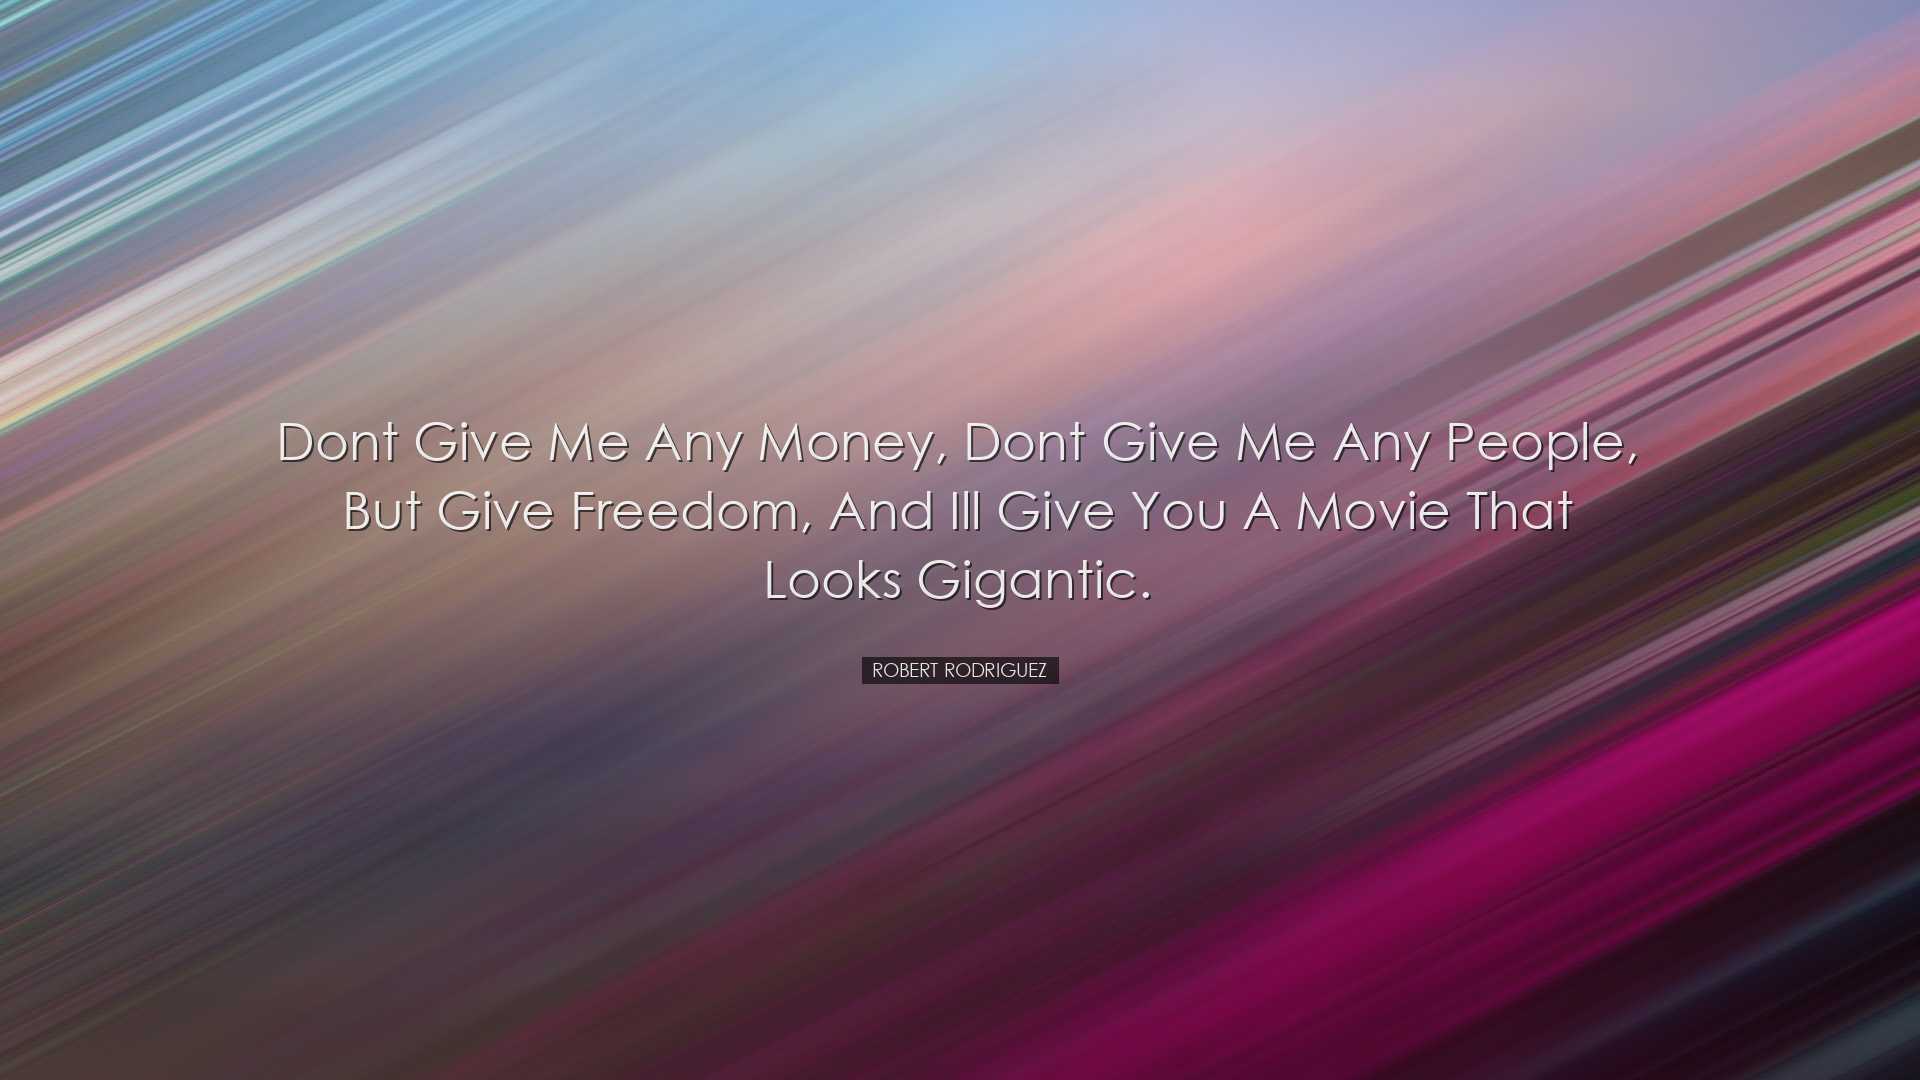 Dont give me any money, dont give me any people, but give freedom,